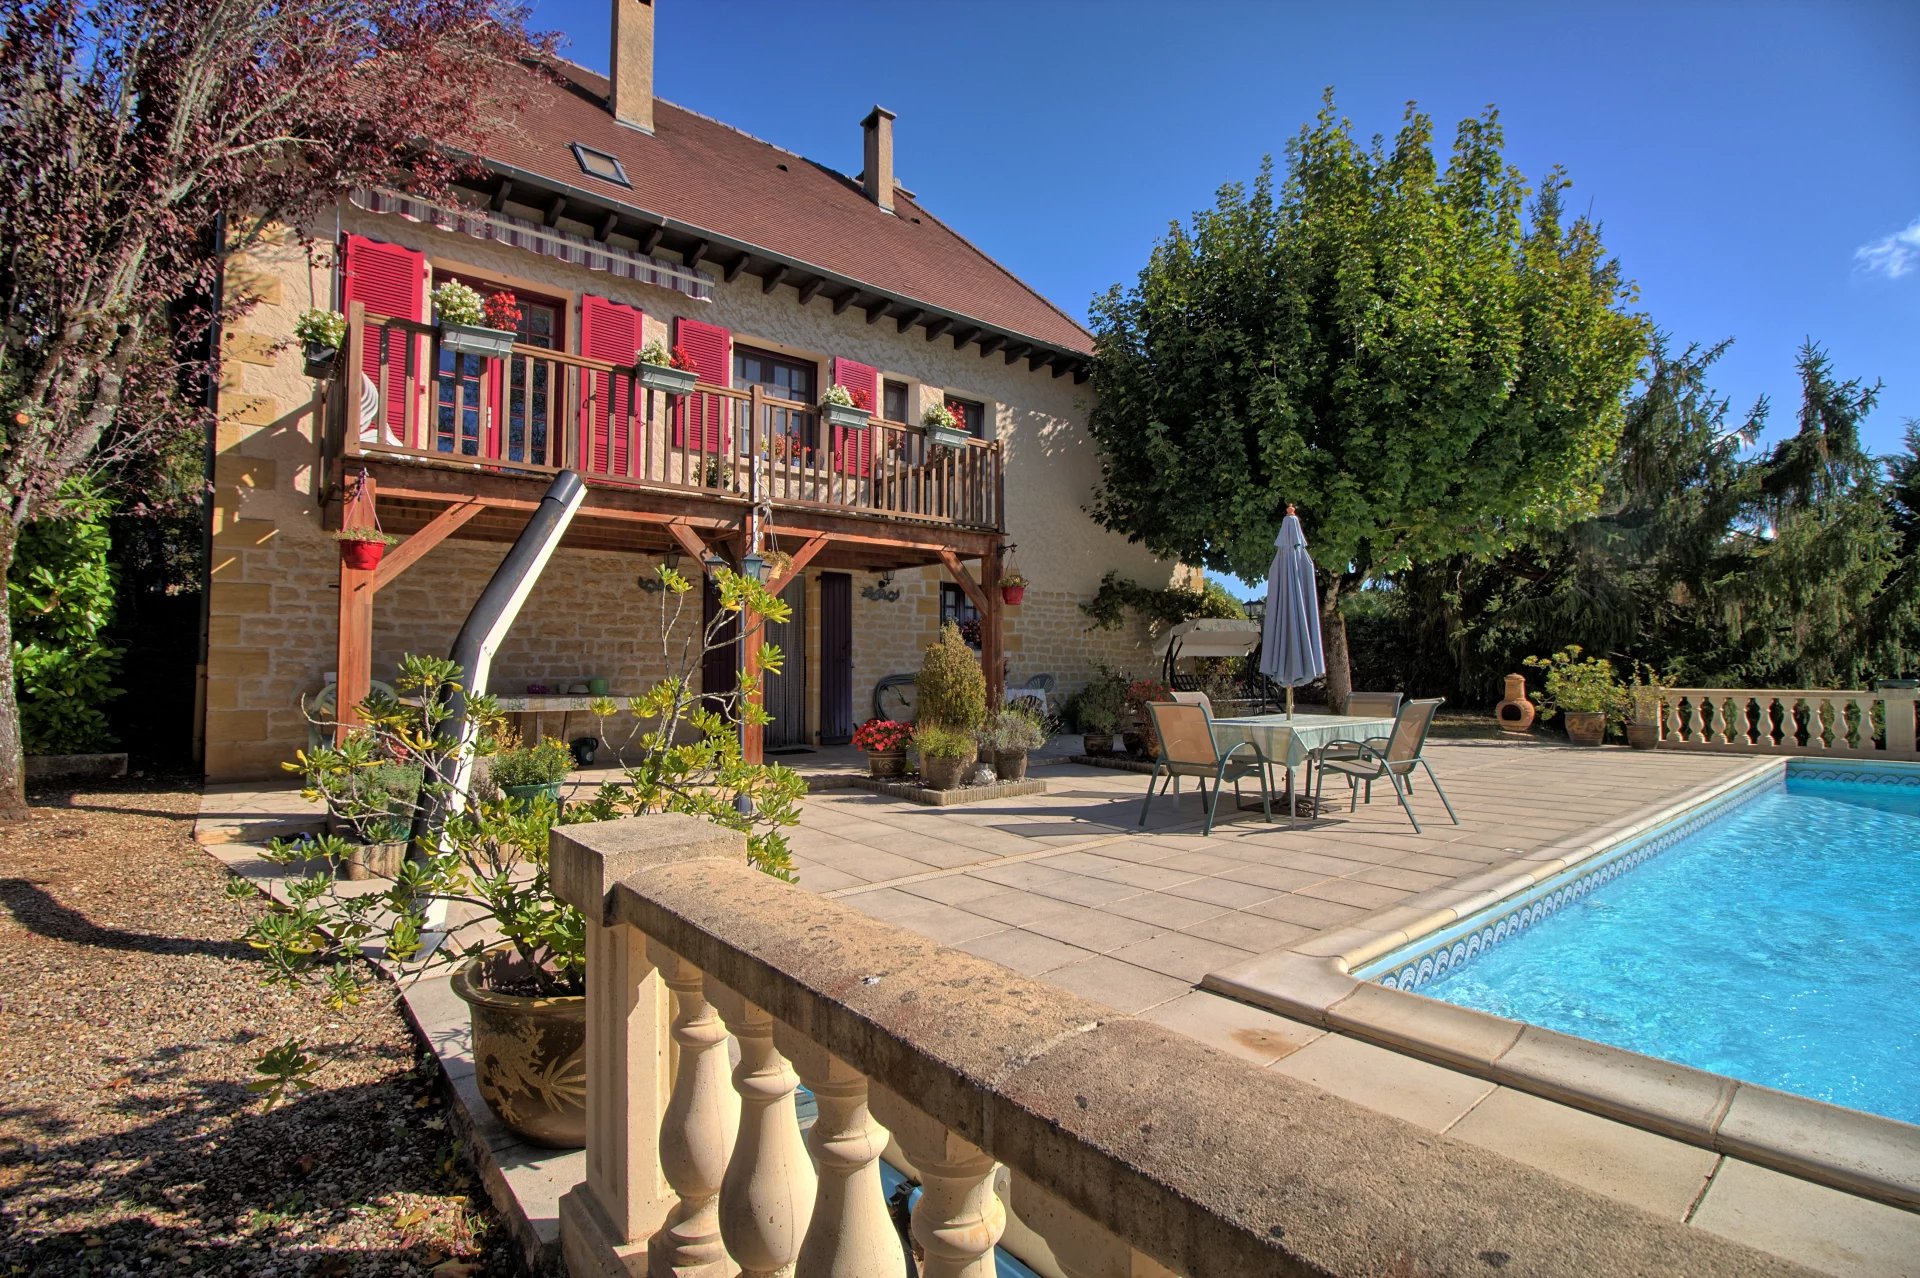 Detached 4/5 bed house with pool. Nr Sarlat